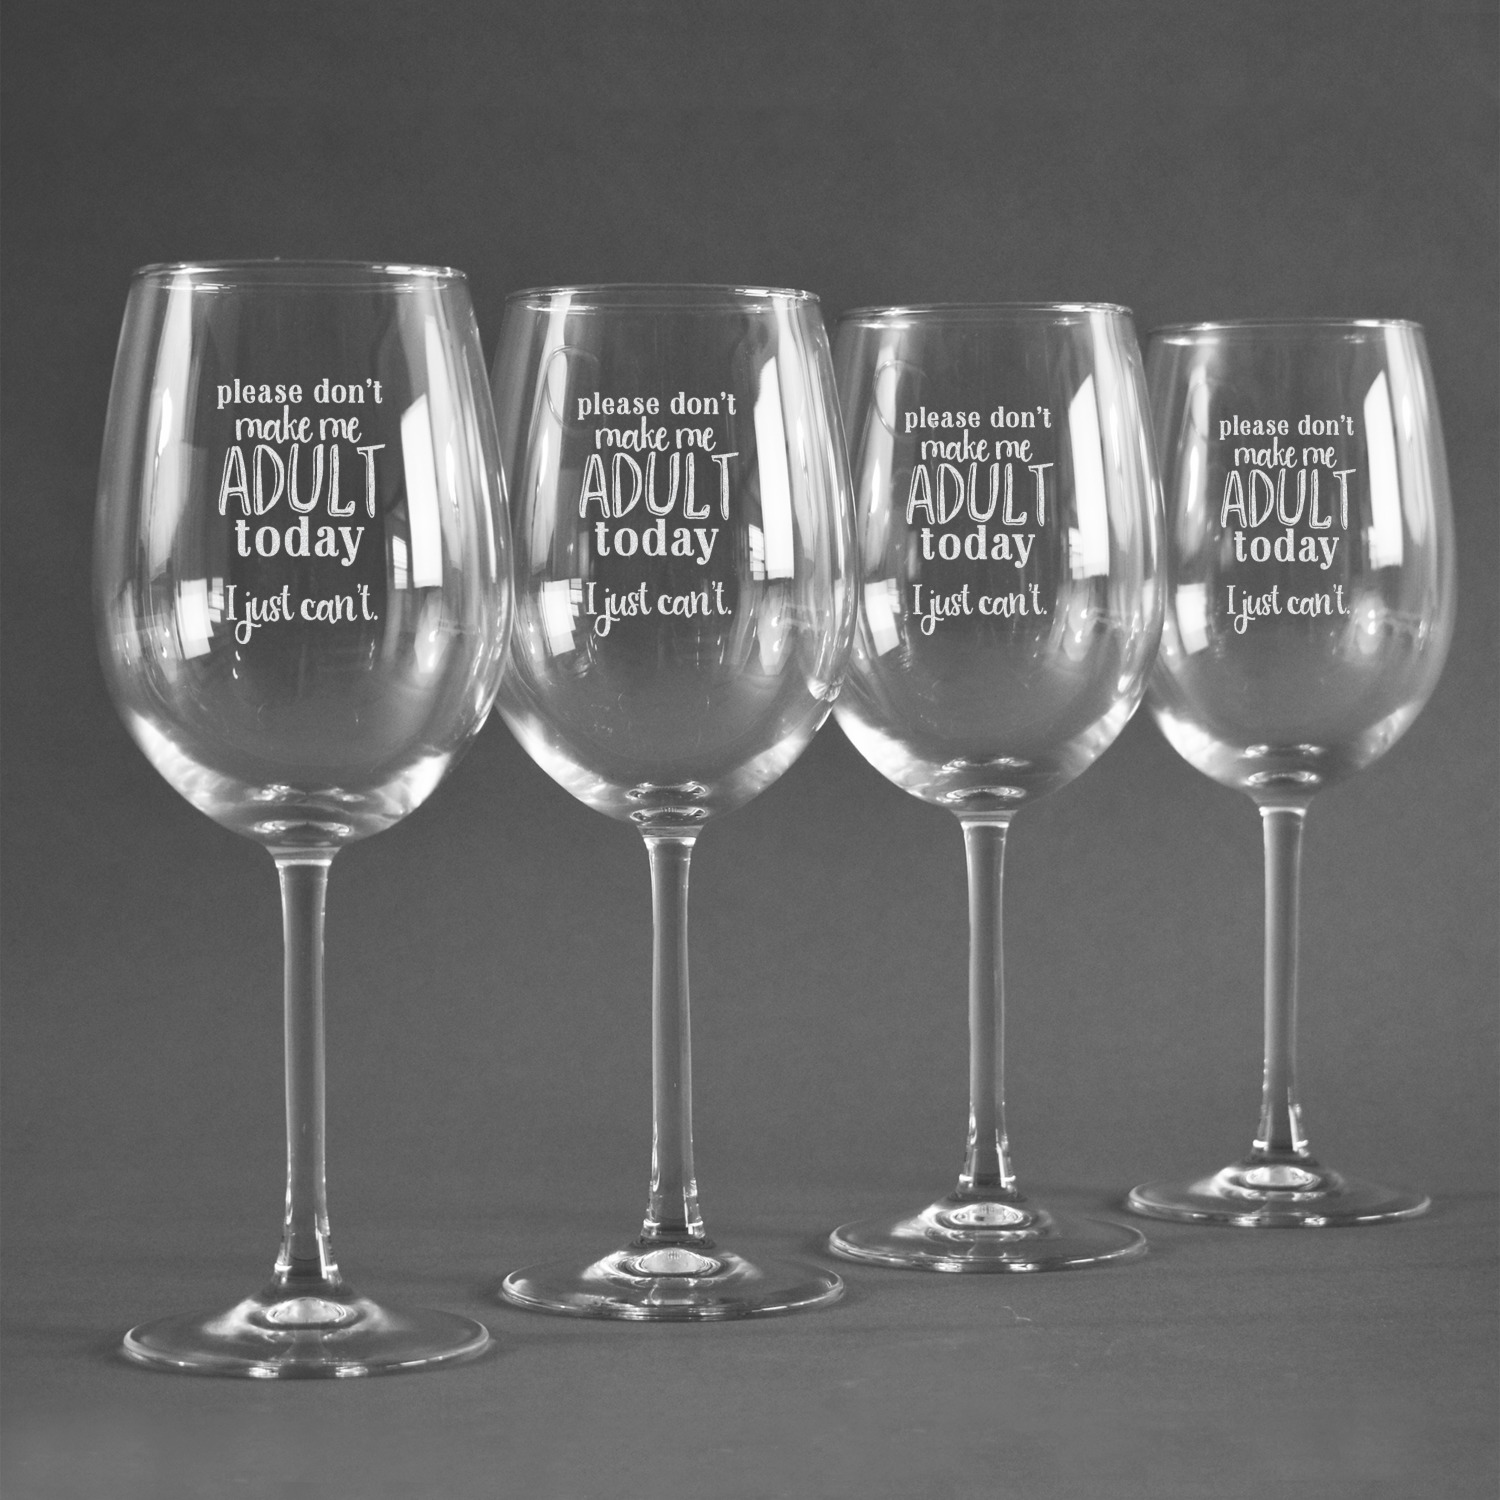 https://www.youcustomizeit.com/common/MAKE/1038321/Funny-Quotes-and-Sayings-Personalized-Wine-Glasses-Set-of-4-2.jpg?lm=1682545461